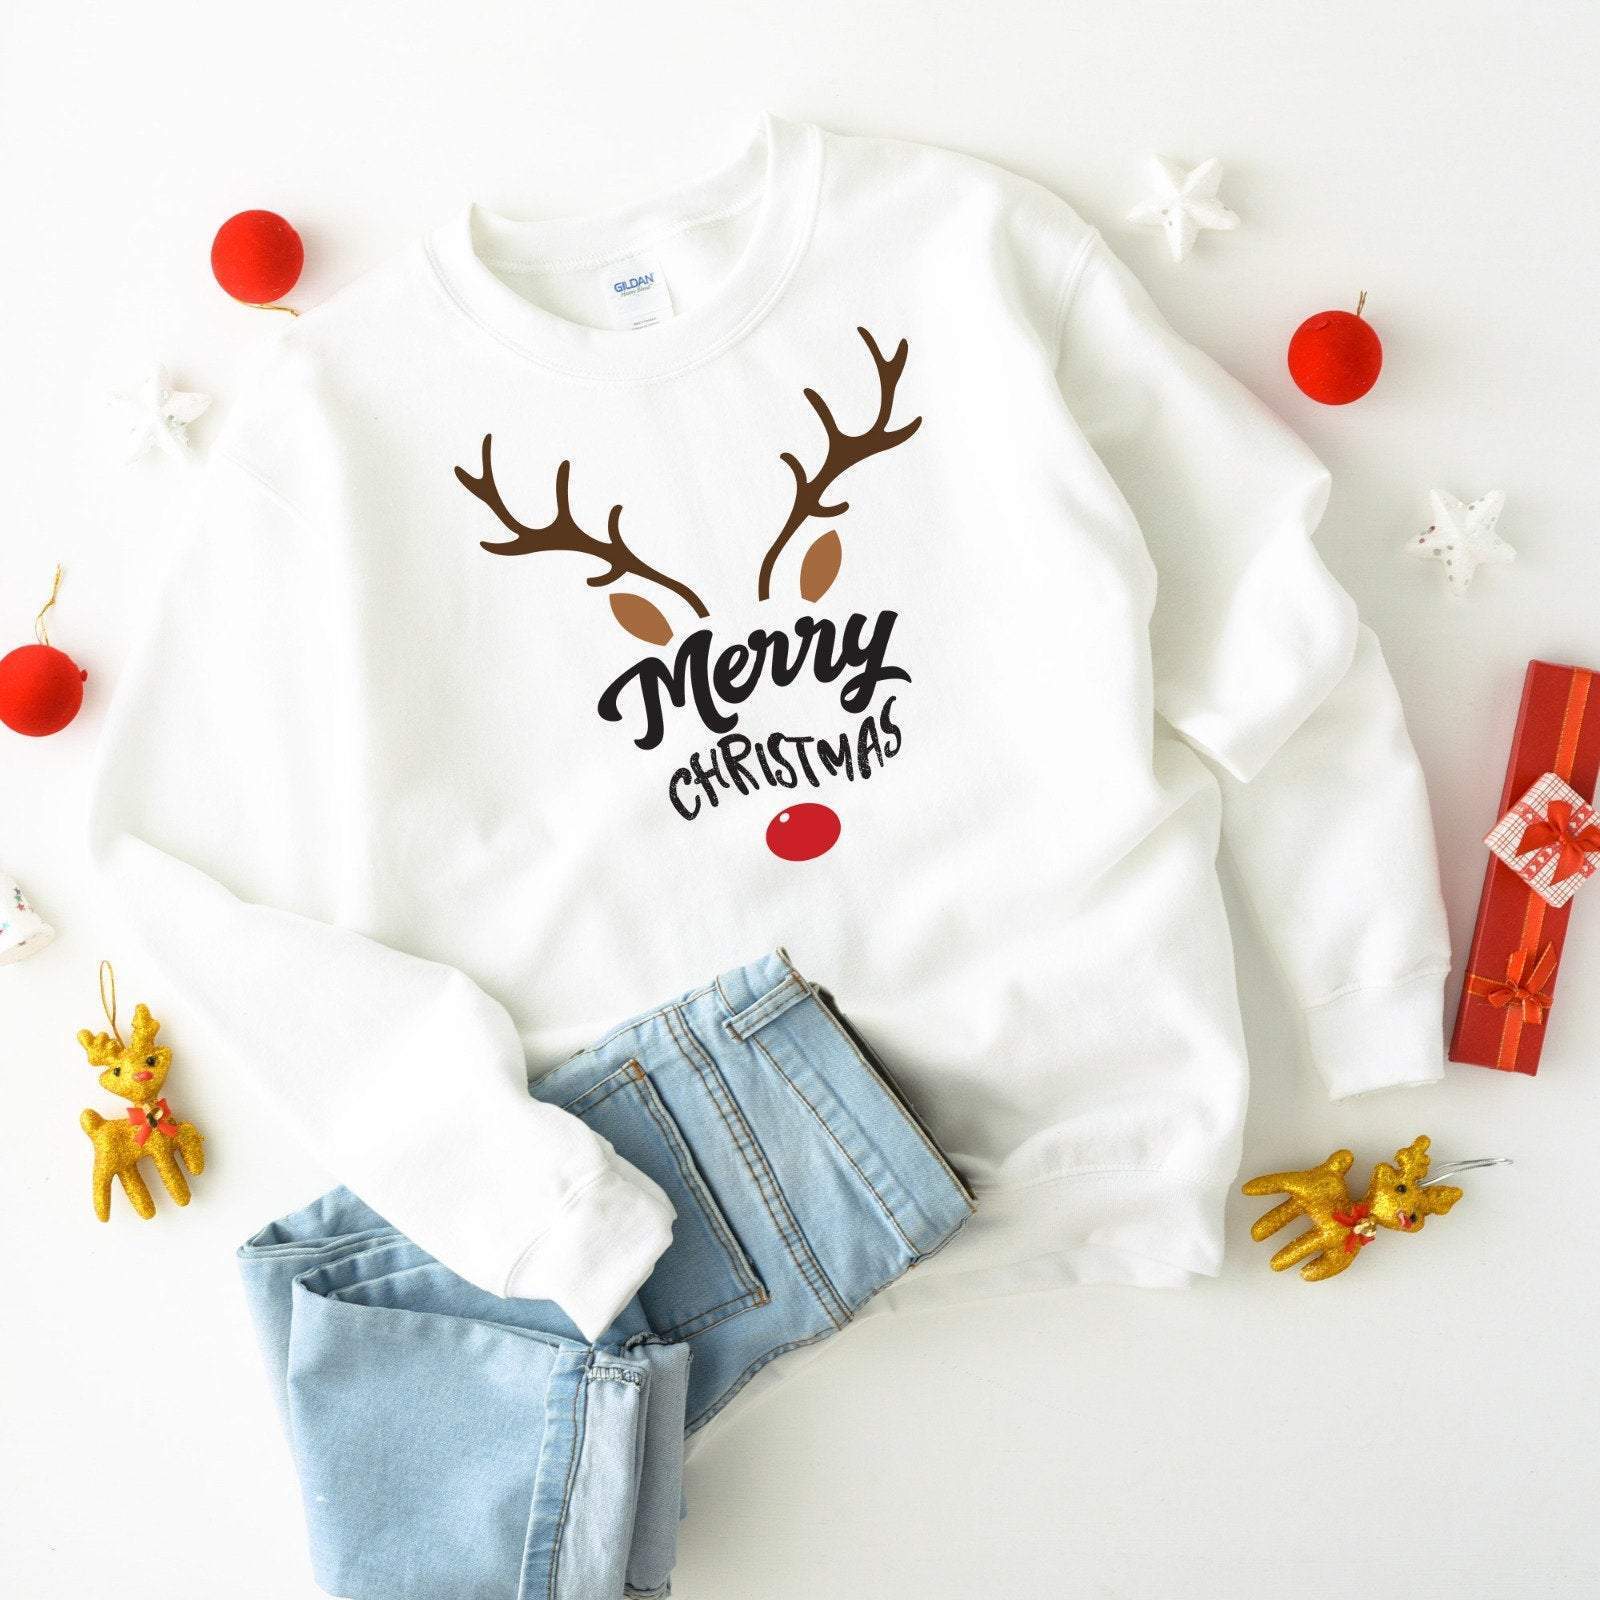 Reindeer Merry Christmas Jumper, Unisex Adult & Kids Sizes, Rudolph Matching Family Outfits